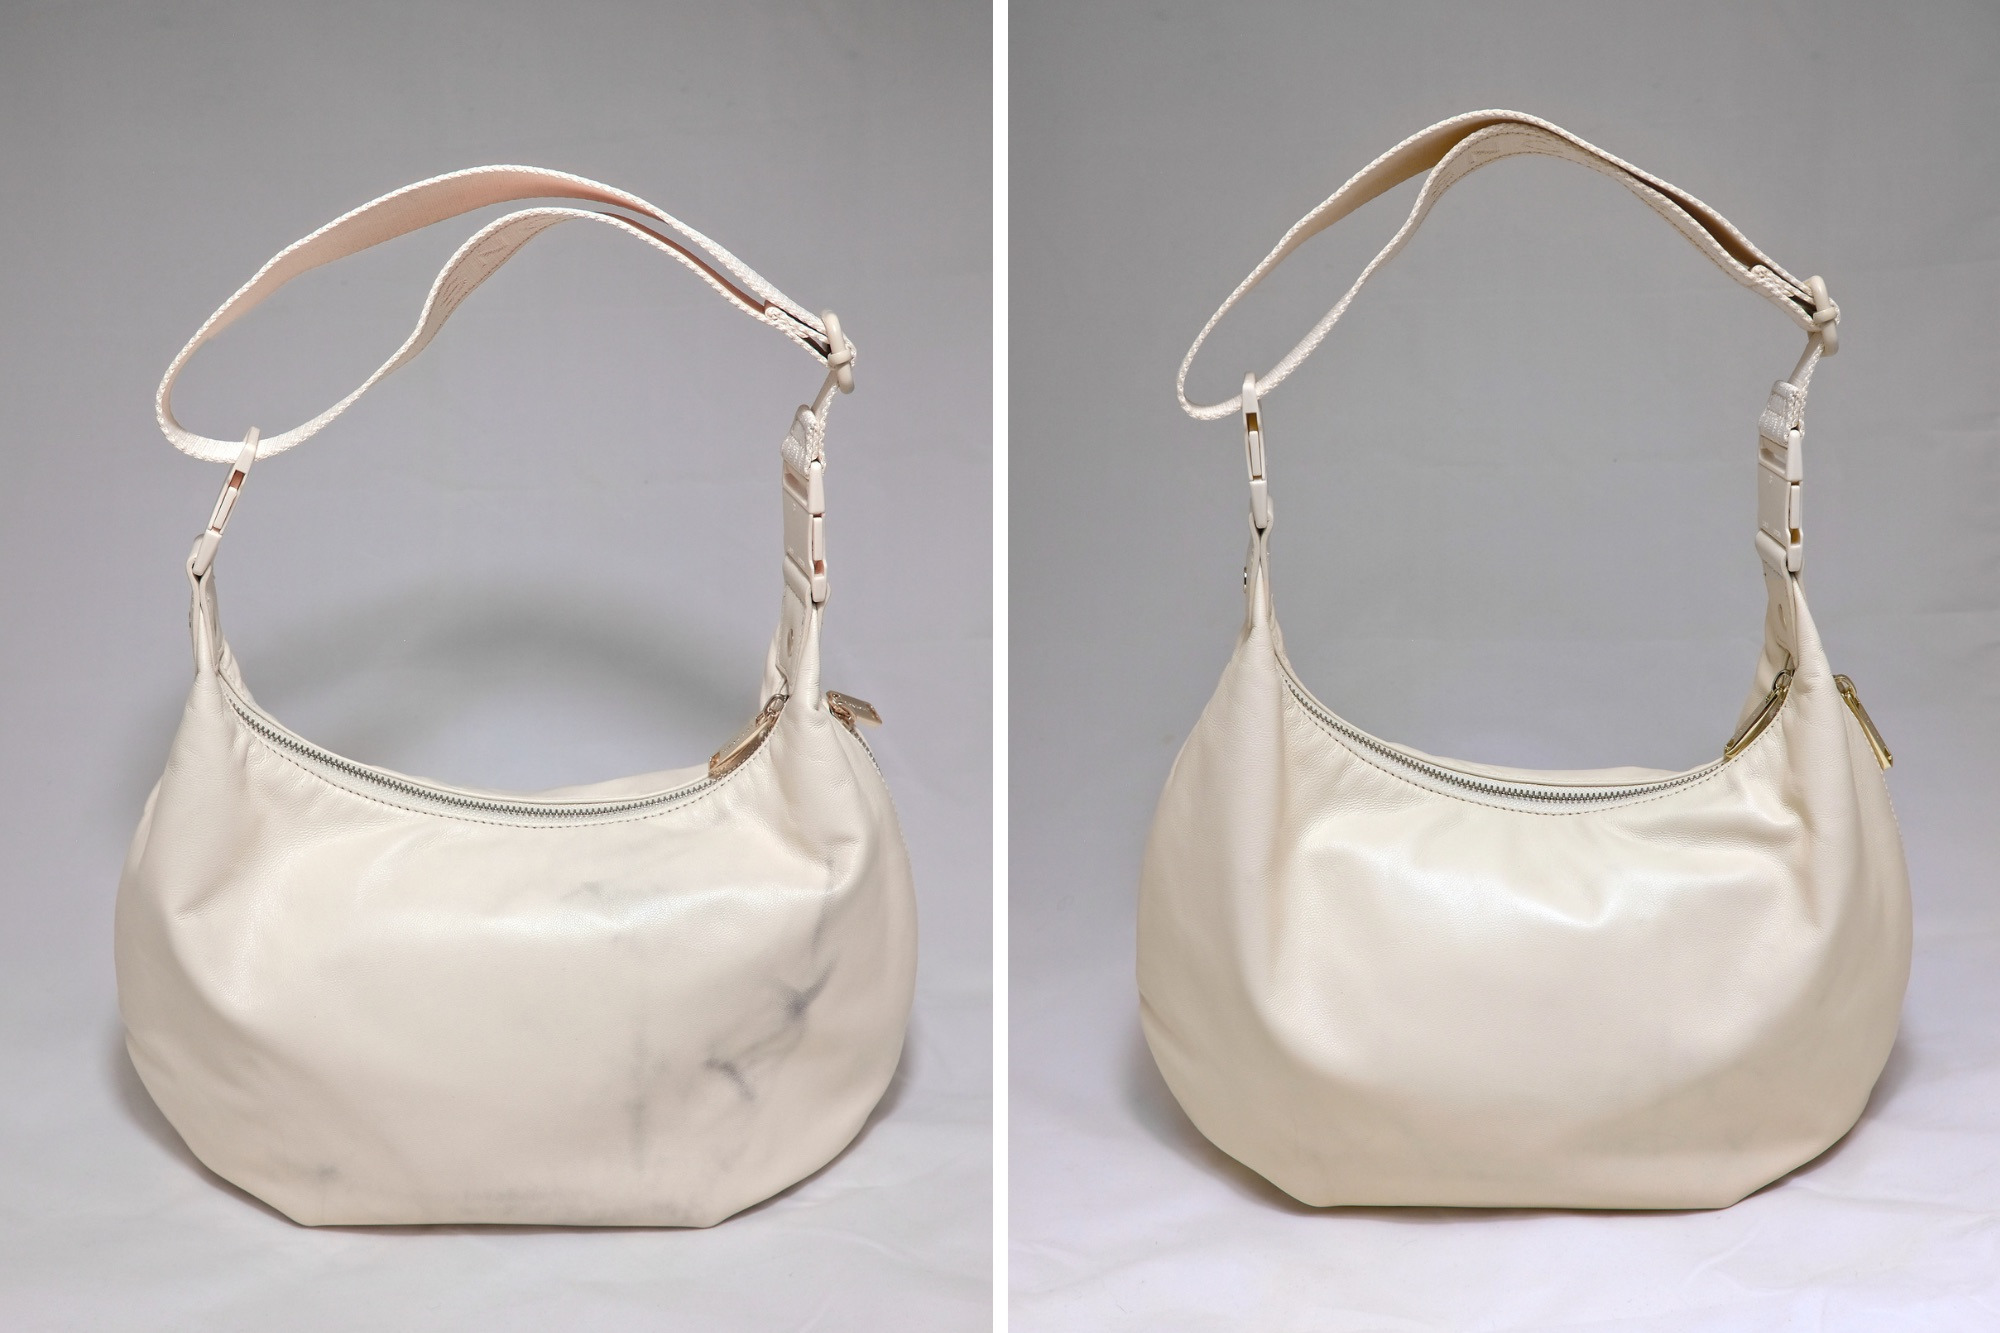 Two photos of the Aoyama Bag before and after cleaning